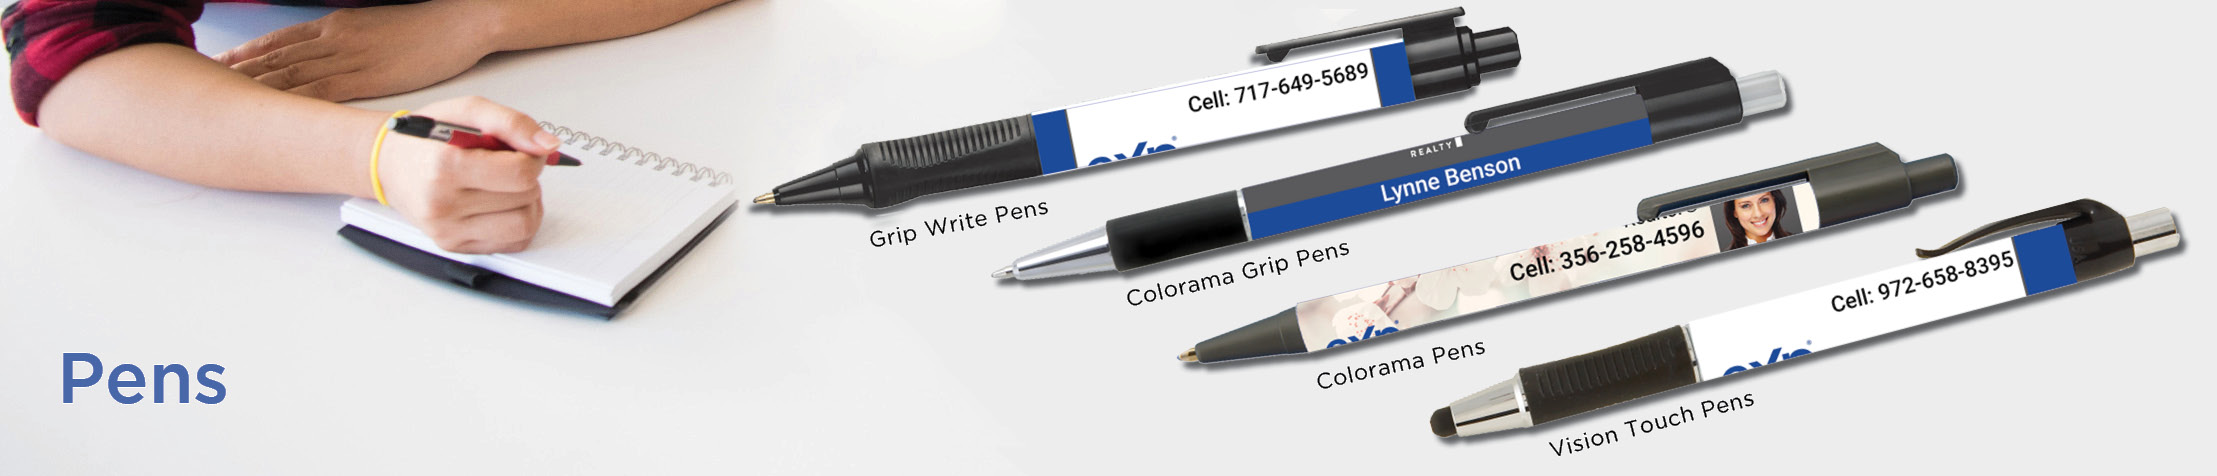 eXp Realty Real Estate Pens - eXp Realty  personalized realtor promotional products | BestPrintBuy.com